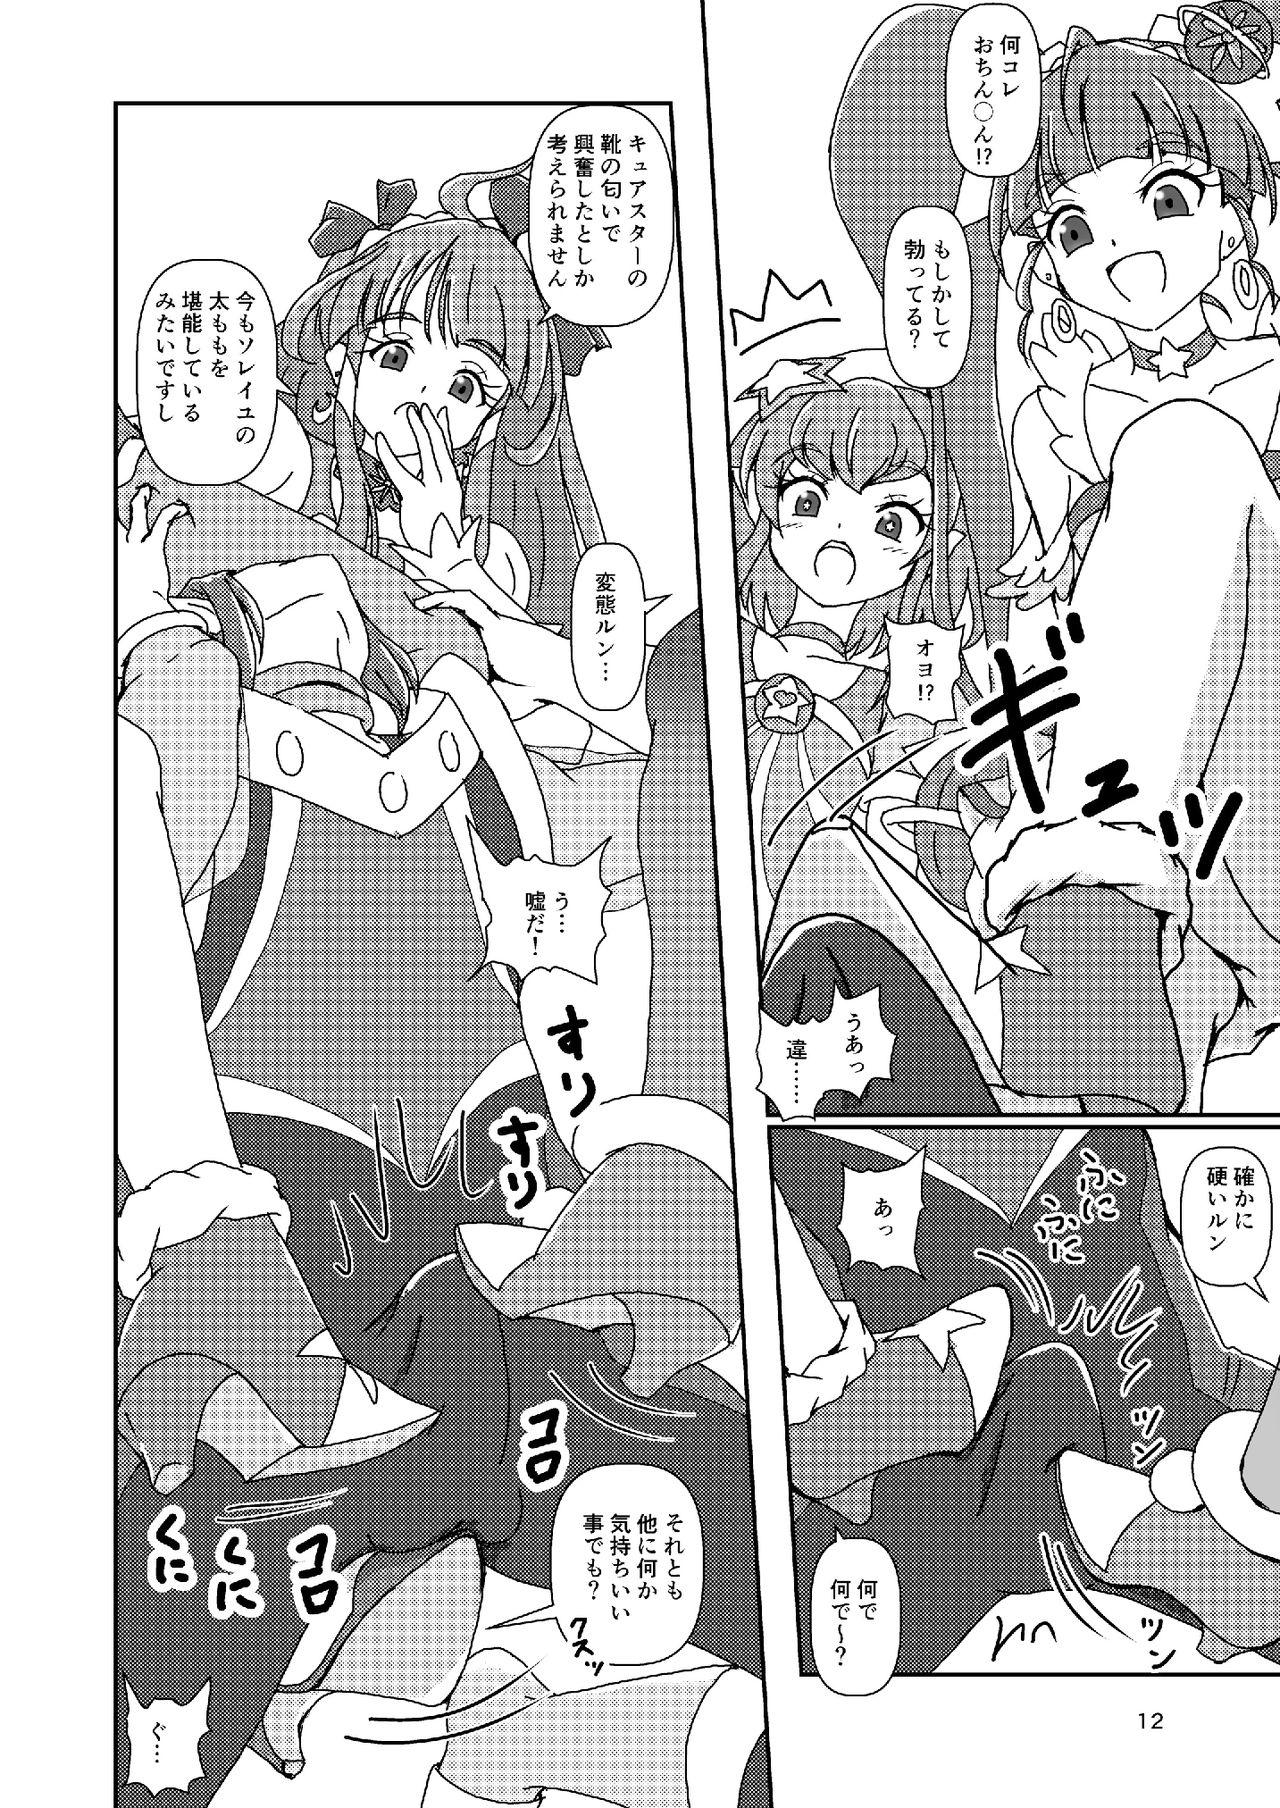 Milfporn スター☆トゥインクルズリキュア - Star twinkle precure Argentino - Page 11